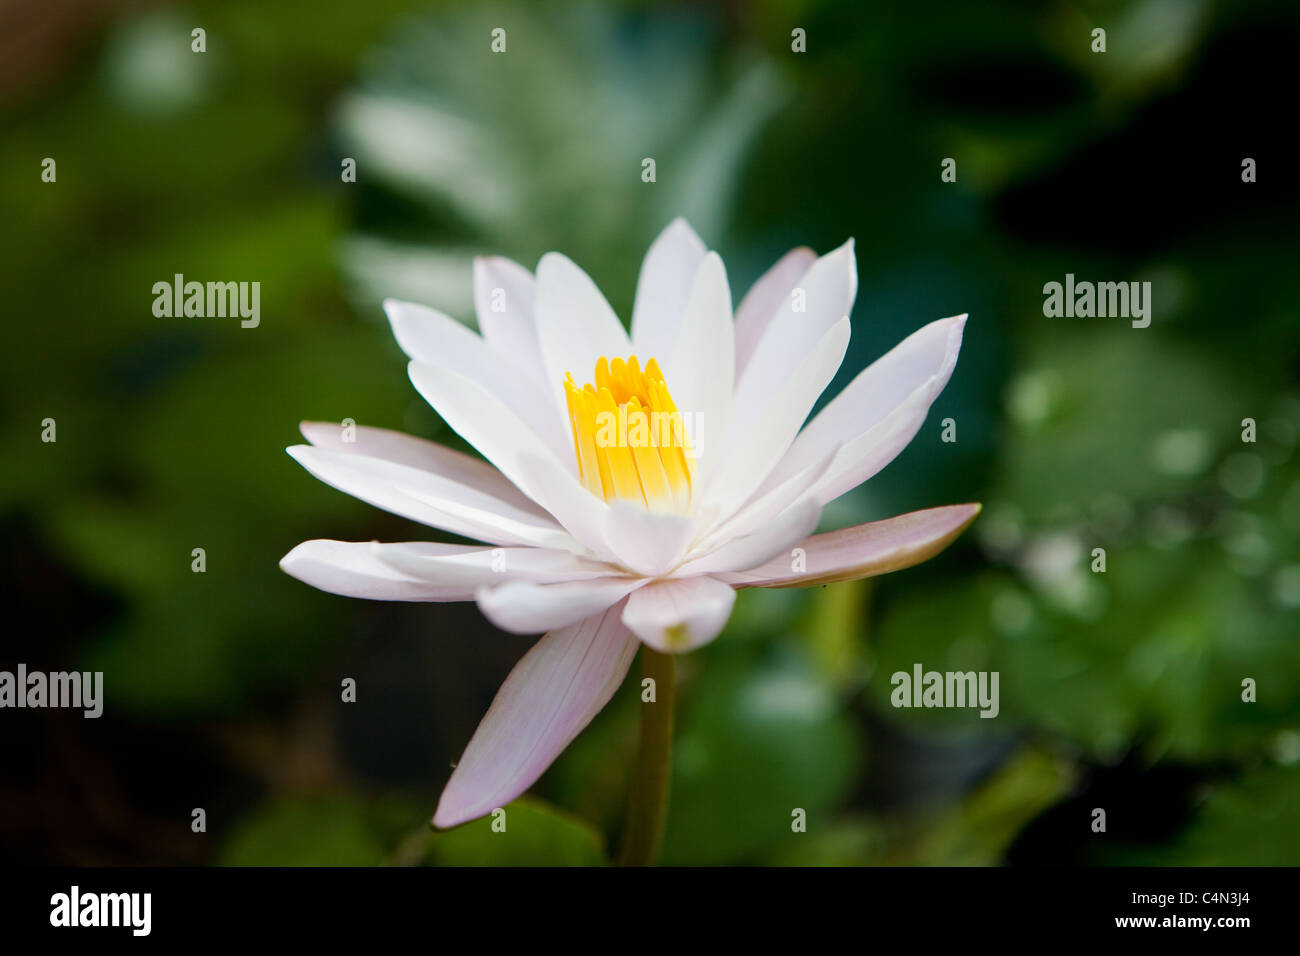 A water lily which was located in a Bangkok garden Stock Photo